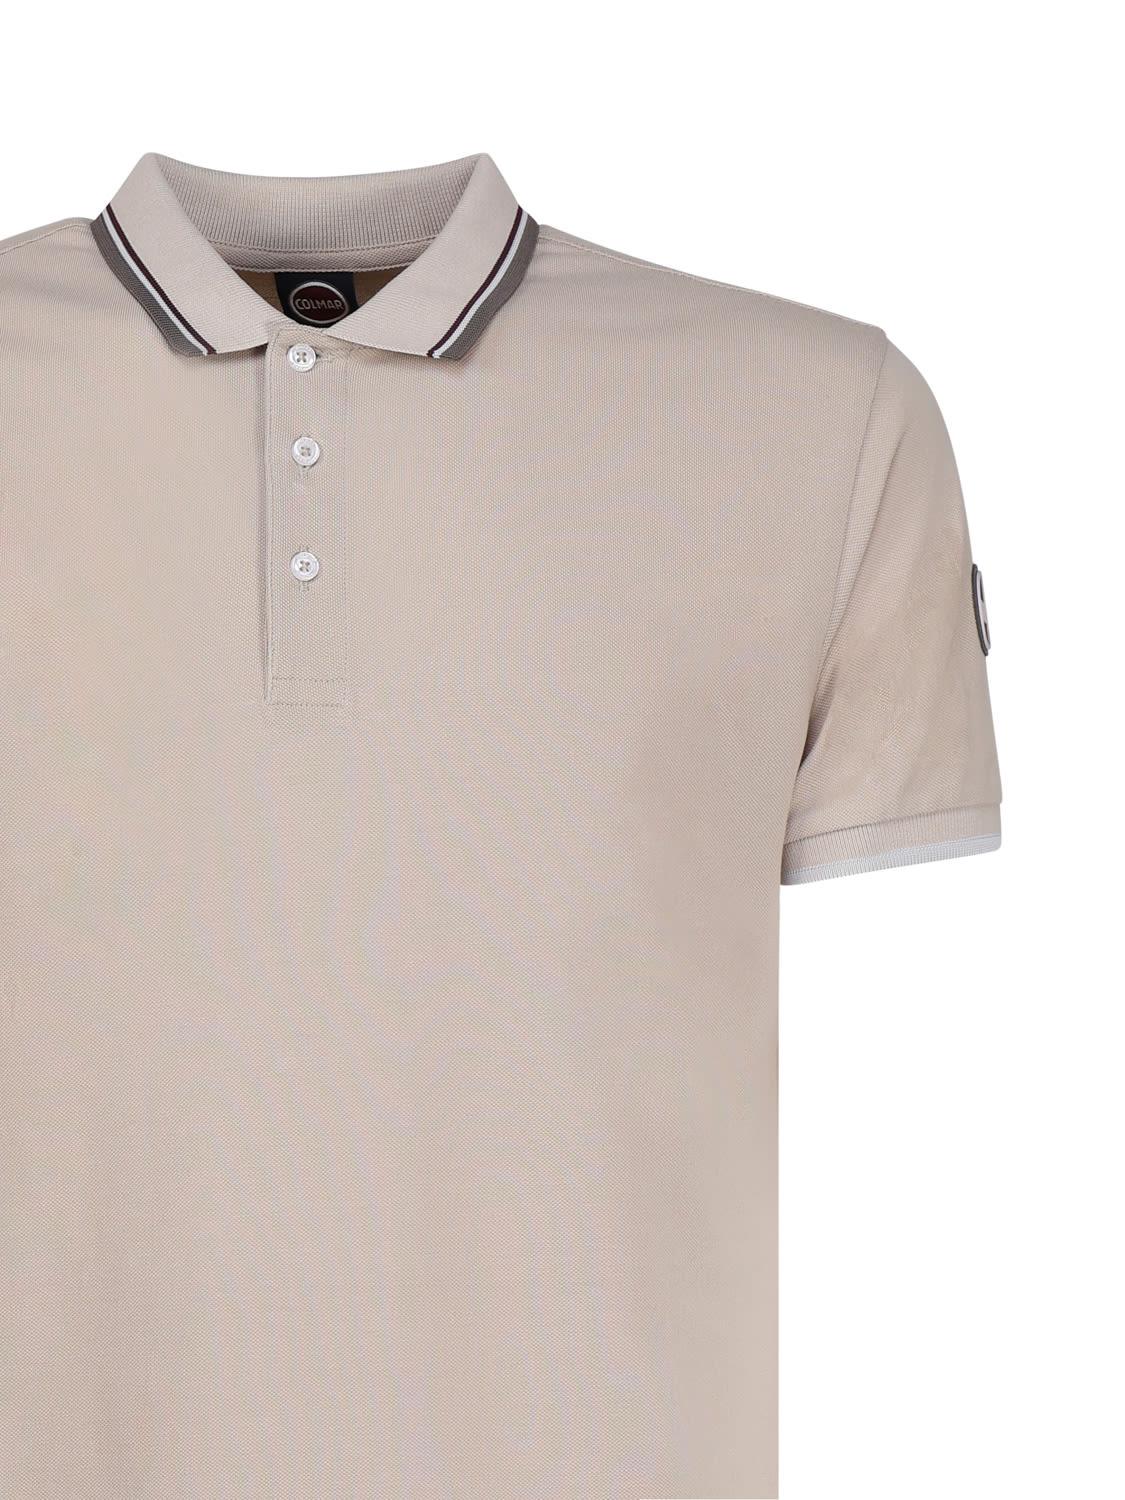 Colmar Piqué Polo Shirt With Stripes On The Collar in Natural for Men | Lyst